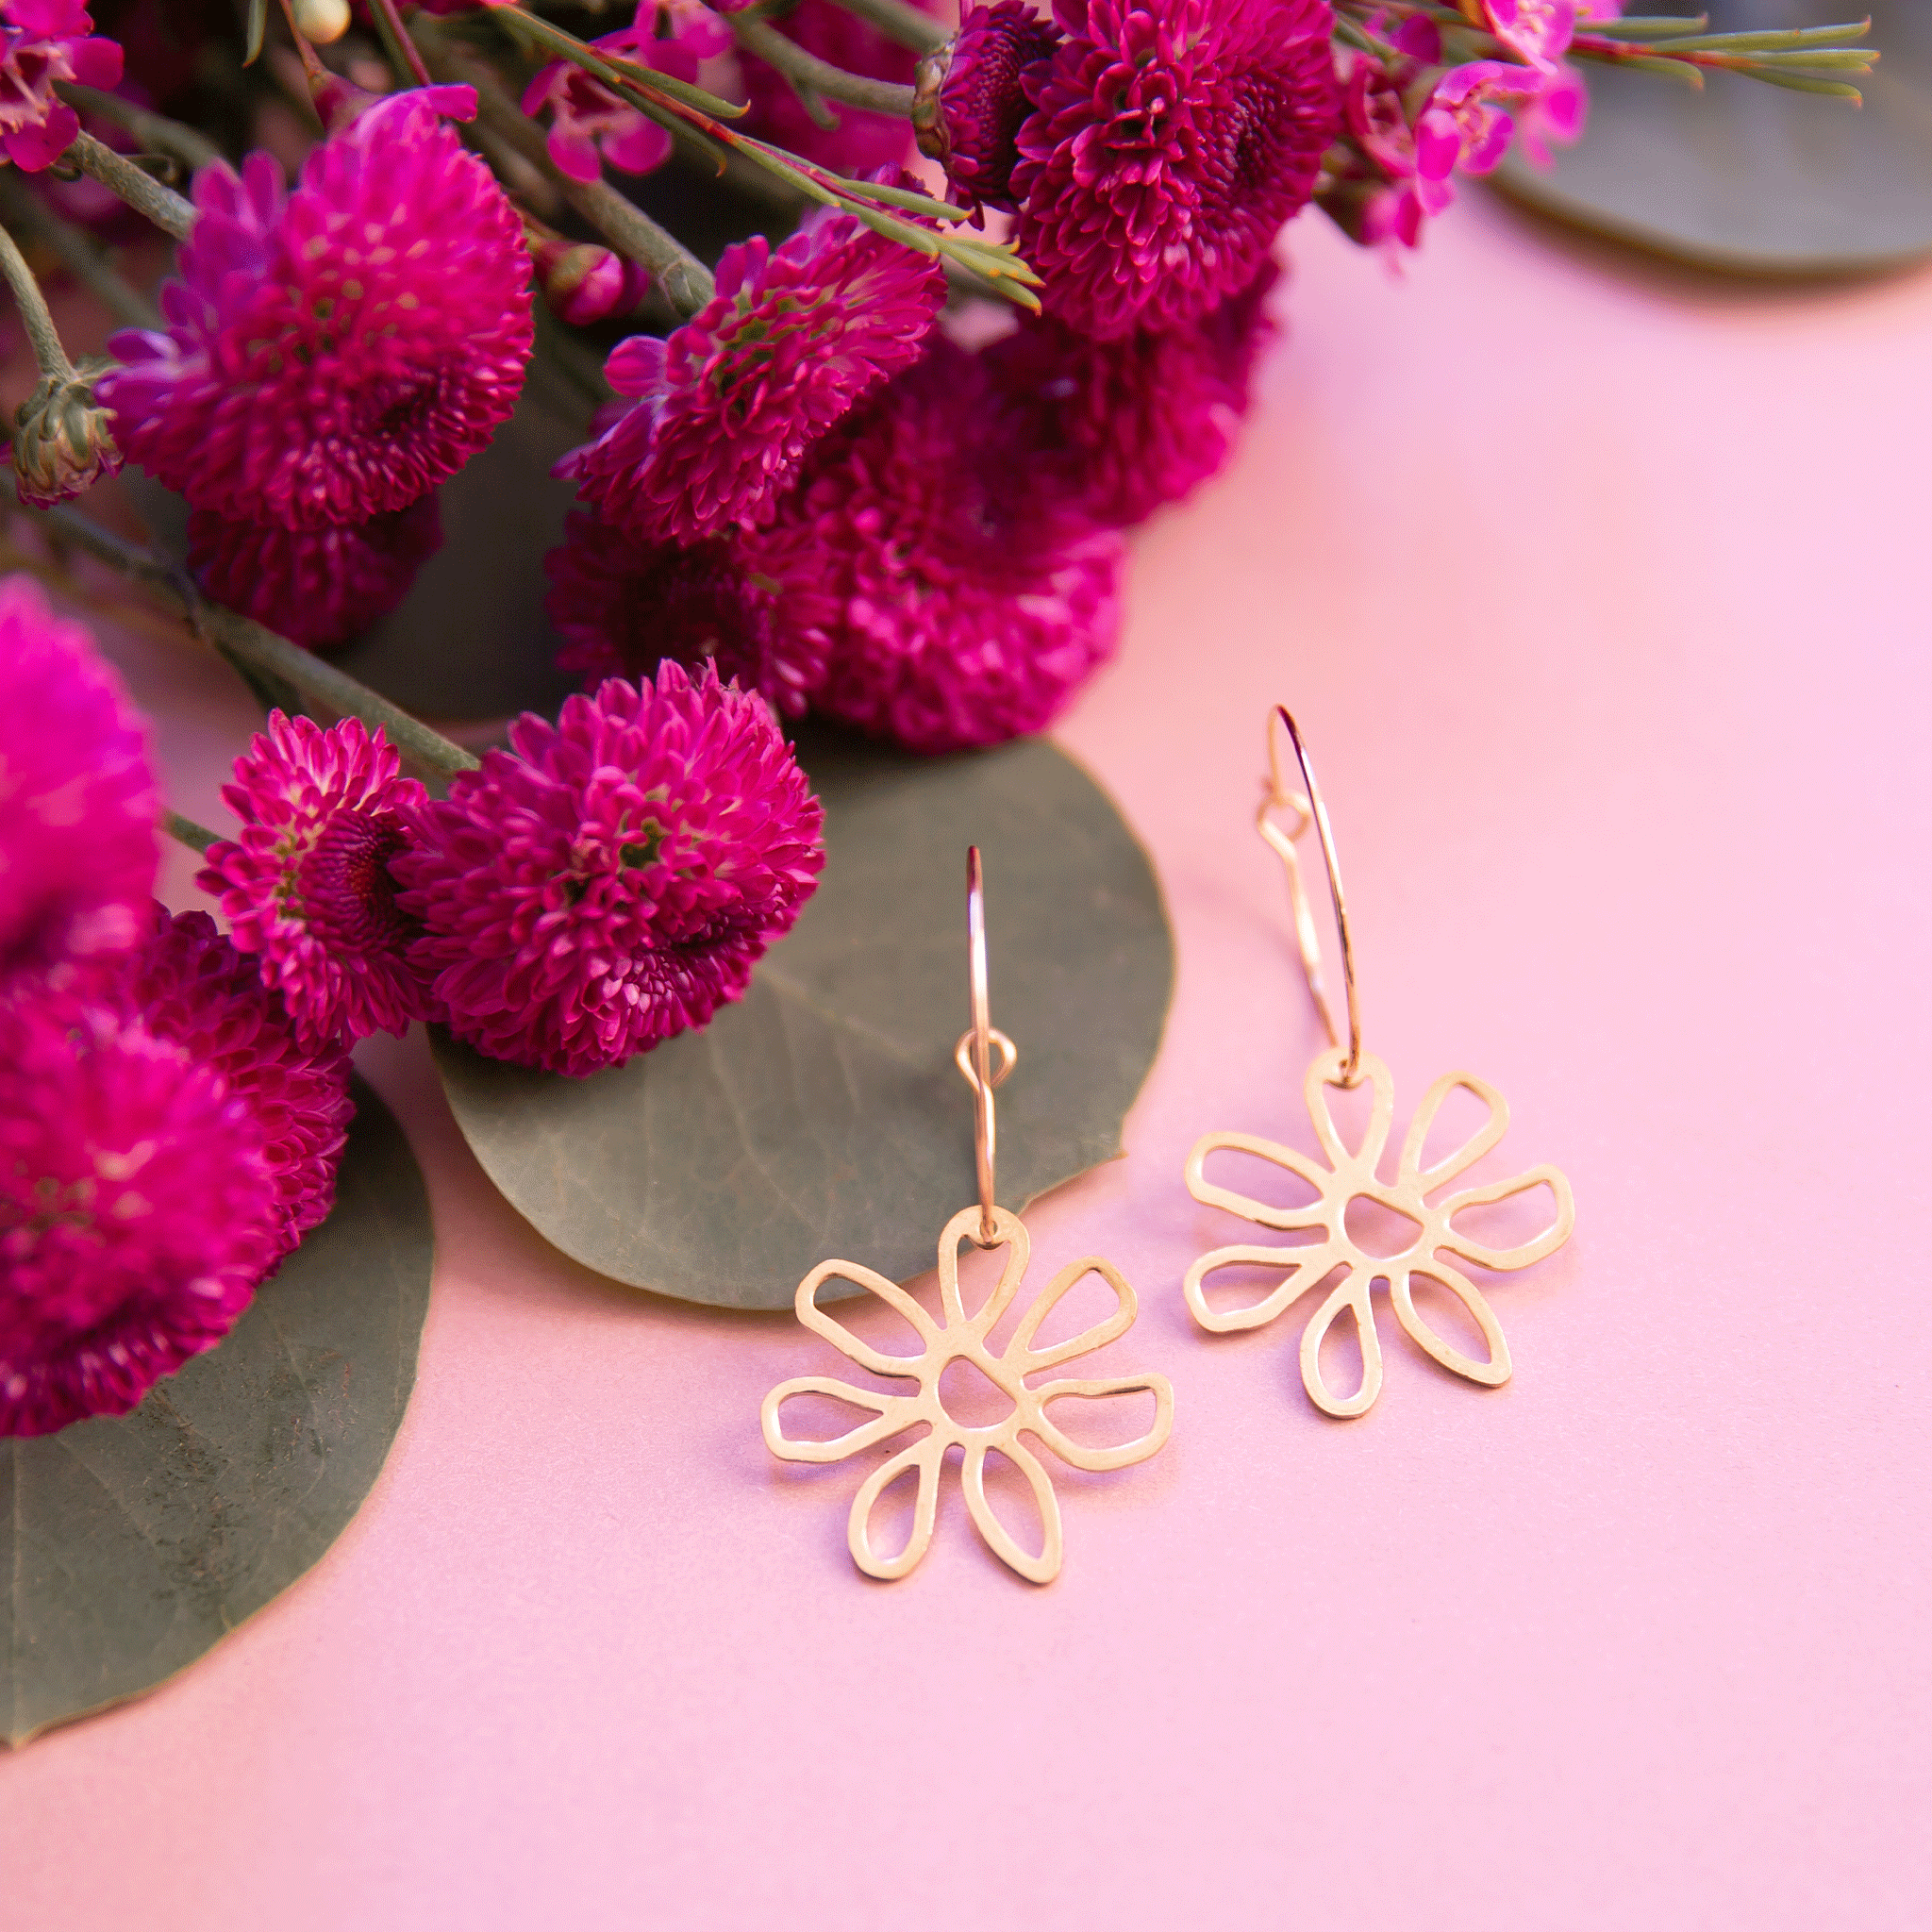 On a pink background is a pair of gold hoop earrings with gold flower outlines hanging from the bottom of each hoop.